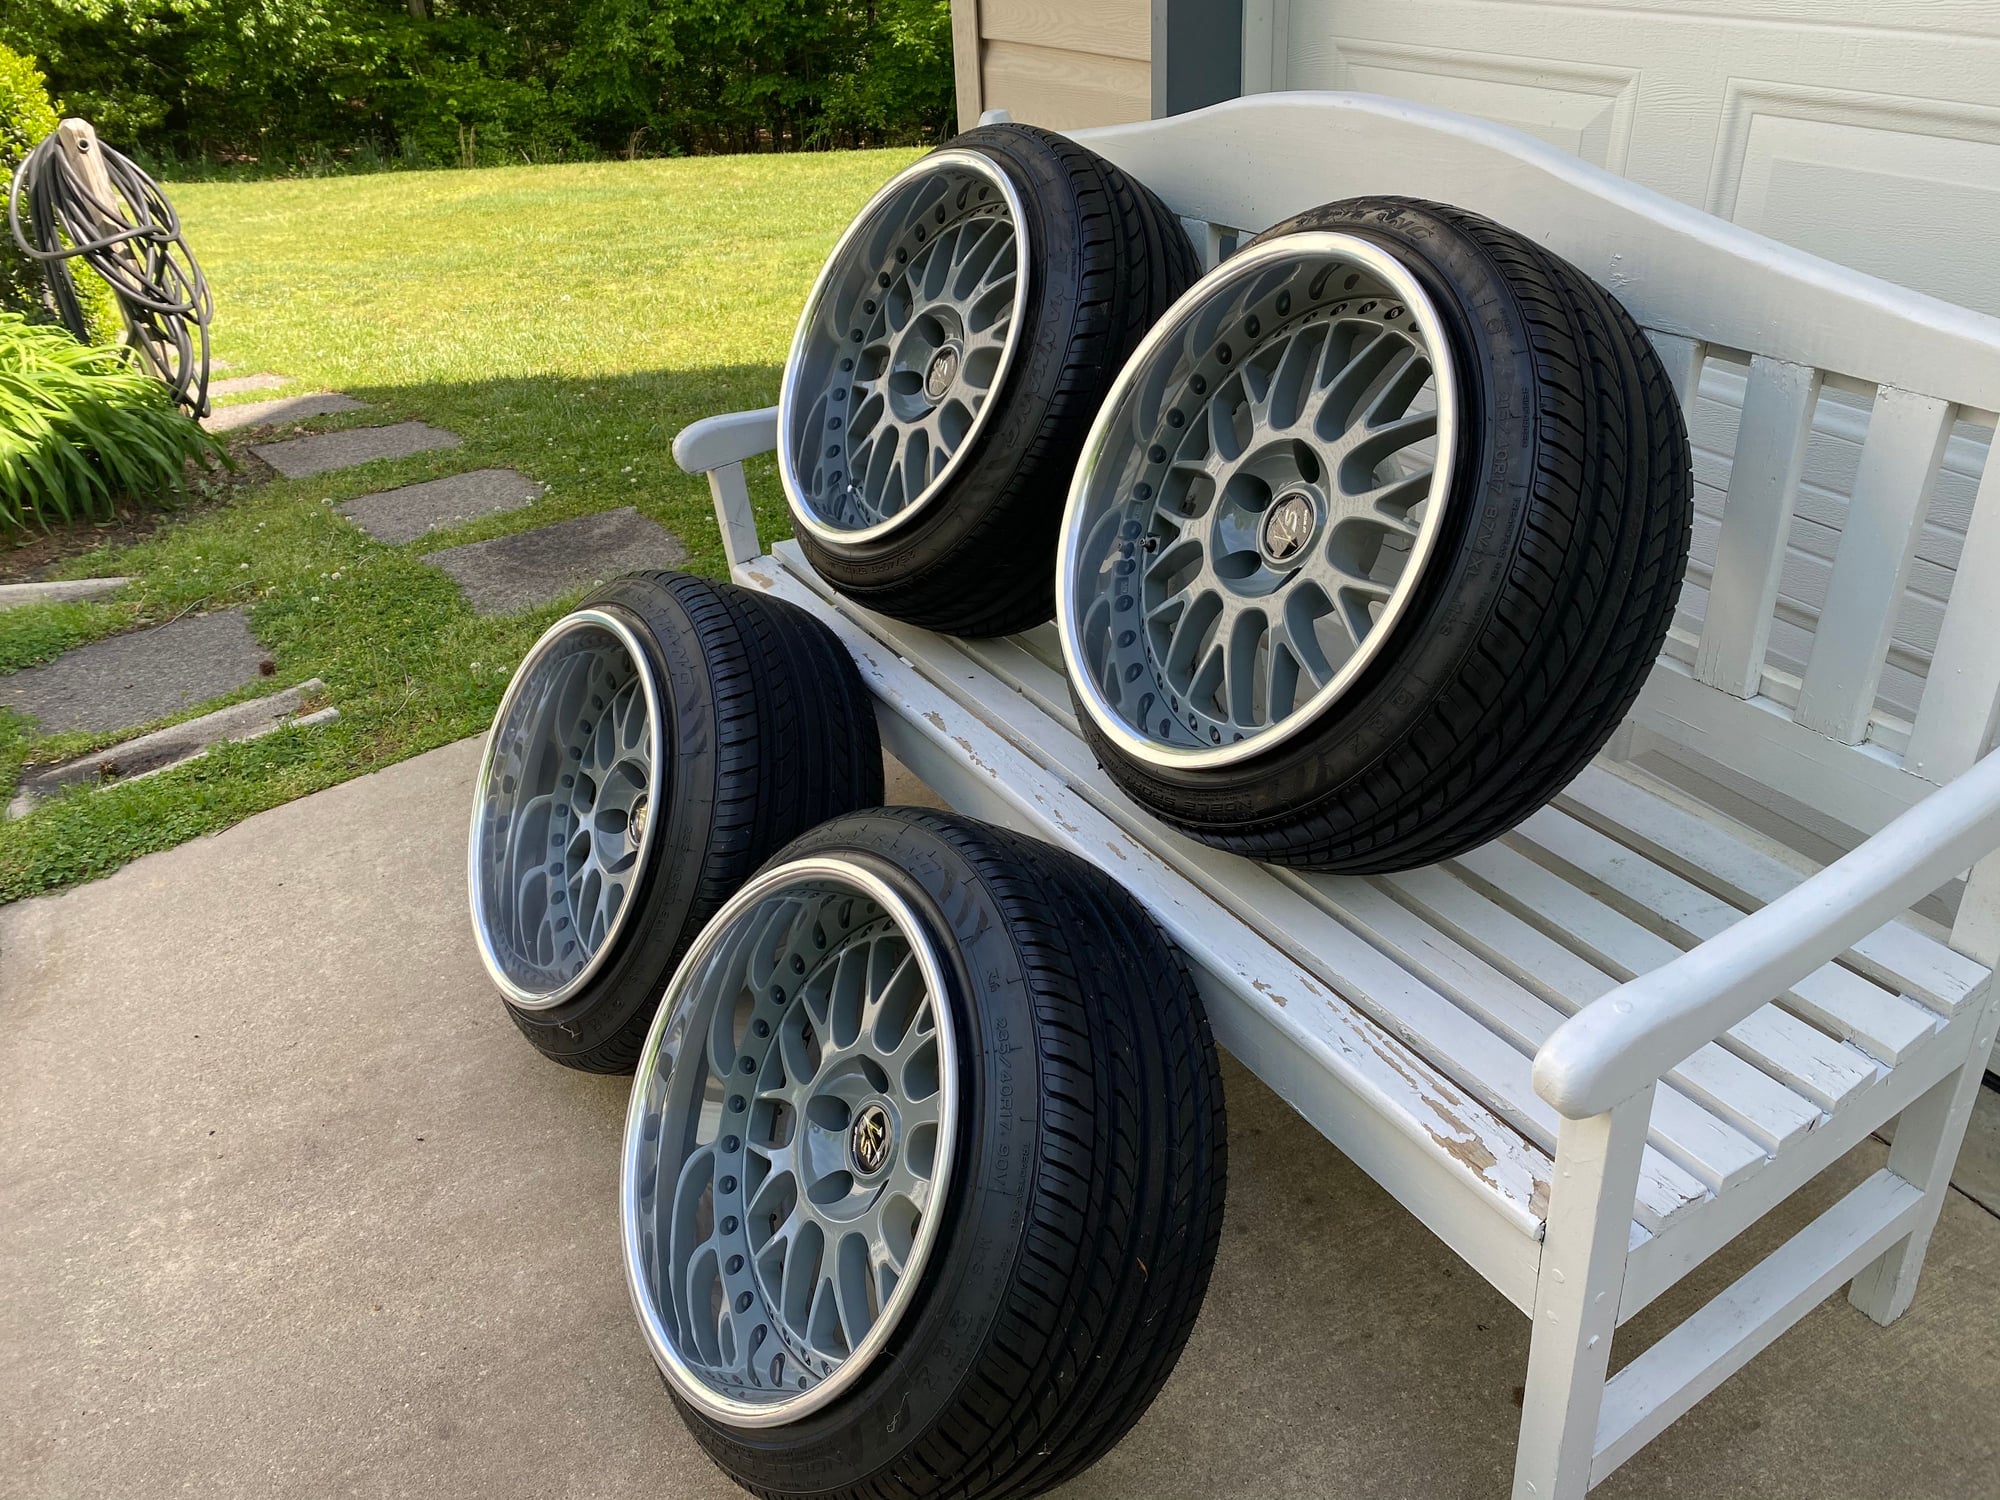 Accessories - Work VS 17 inch rims new powder coat faces and lips. - Used - 1986 to 1995 Mazda RX-7 - Prince Frederick, MD 20678, United States